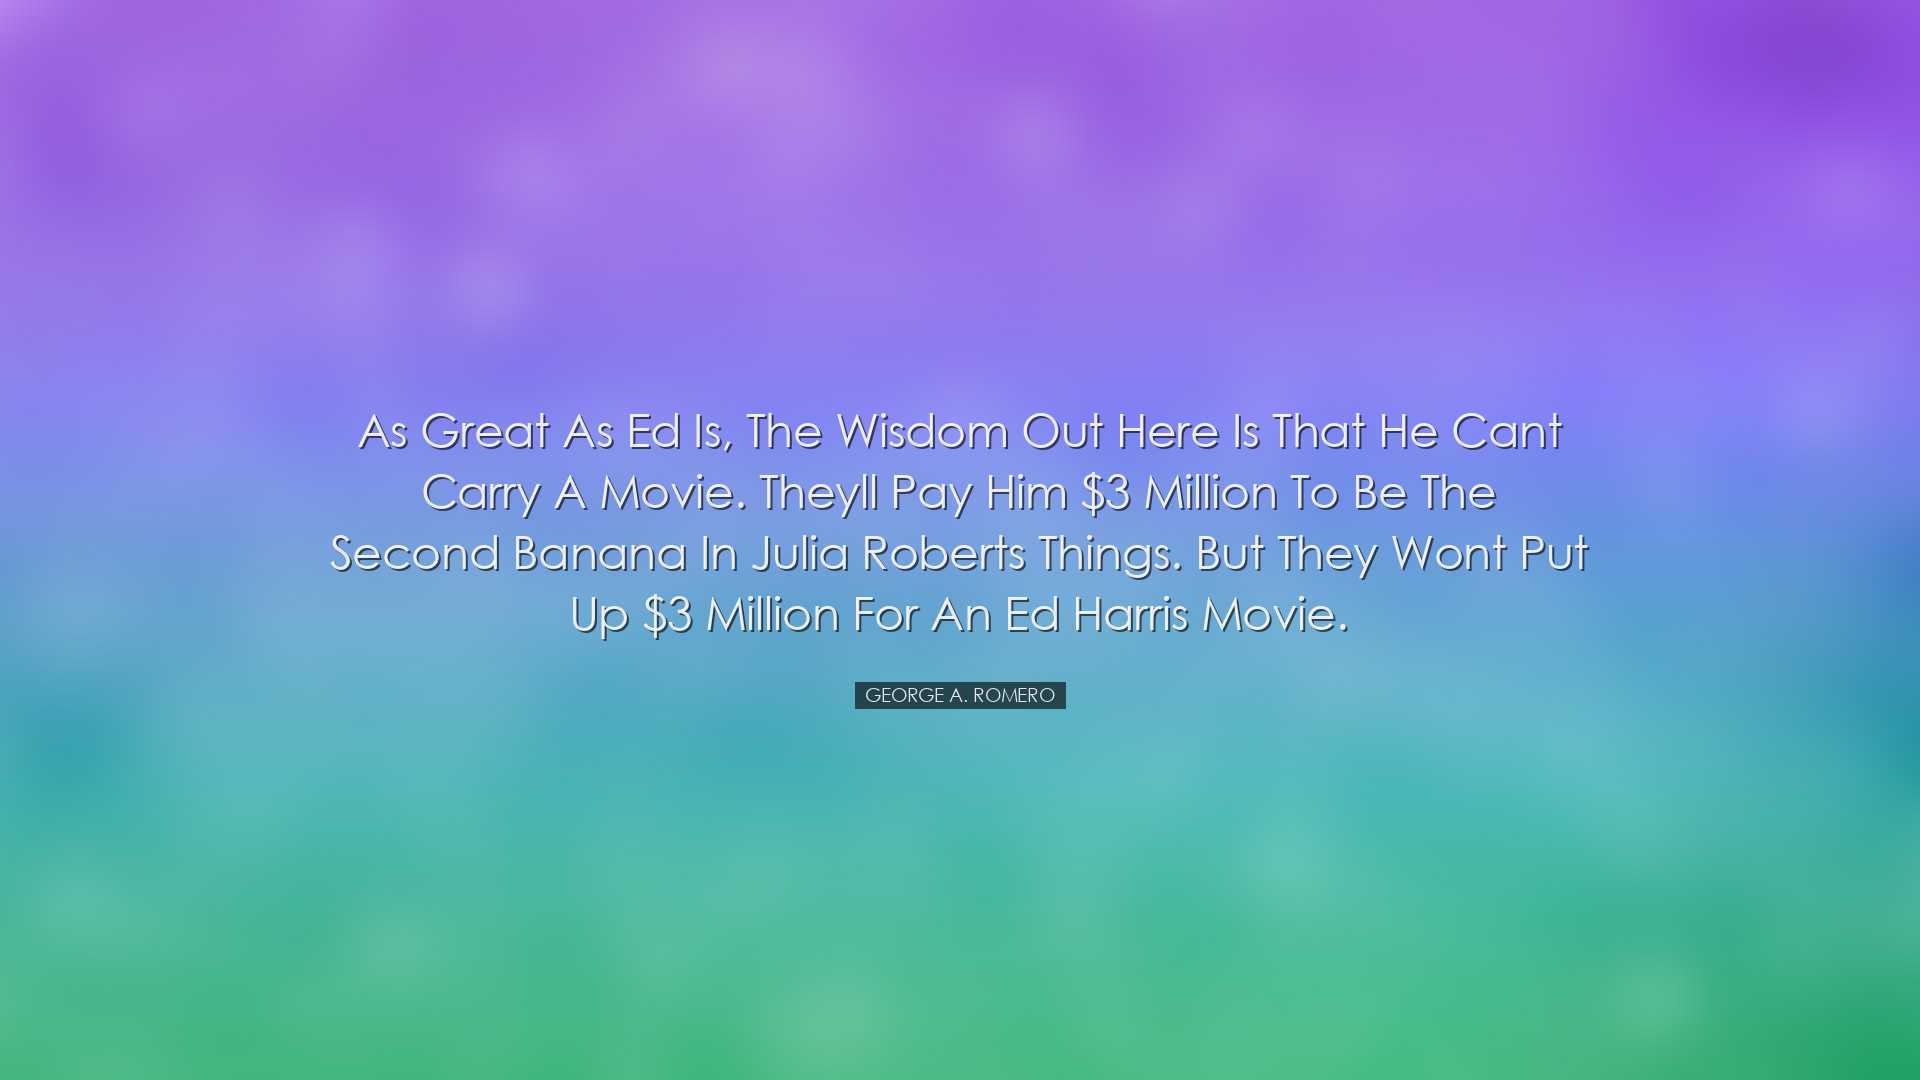 As great as Ed is, the wisdom out here is that he cant carry a mov